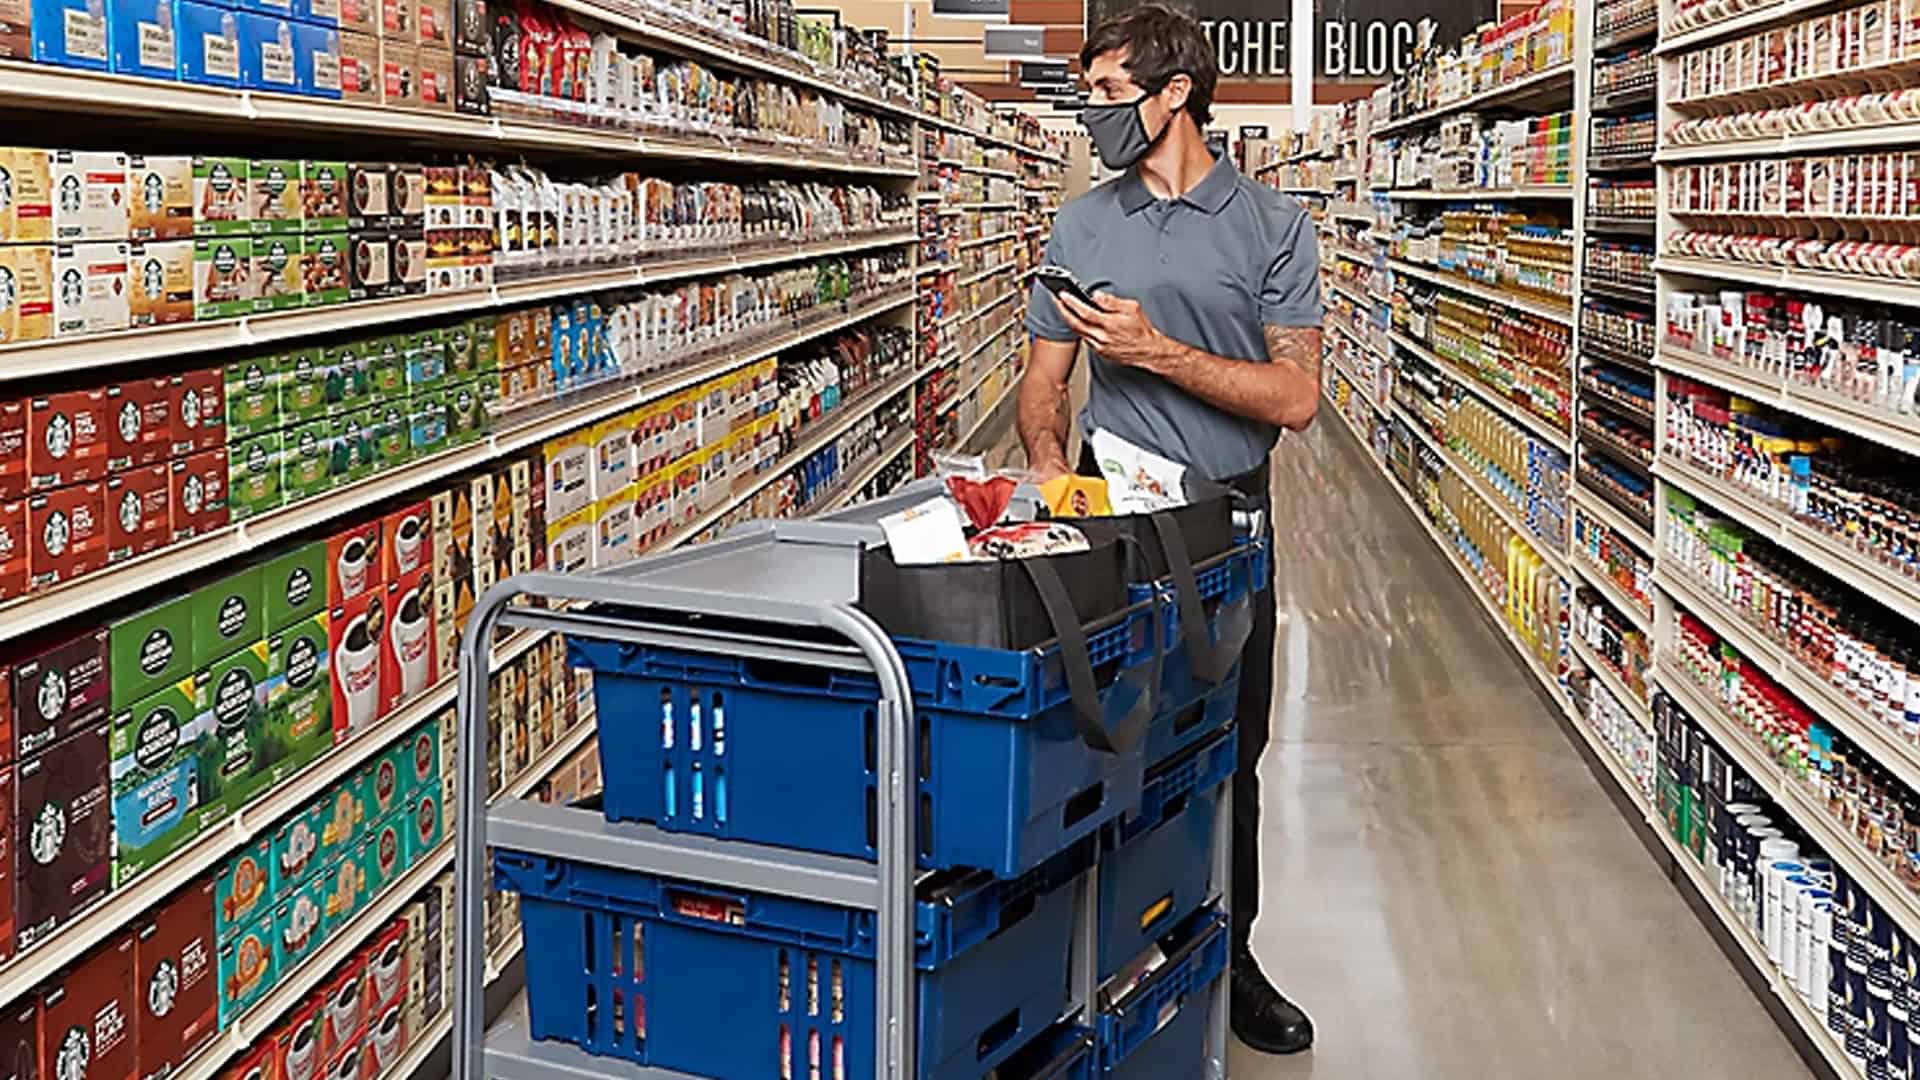 image of safeway grocery delivery picker shopping for groceries inside store